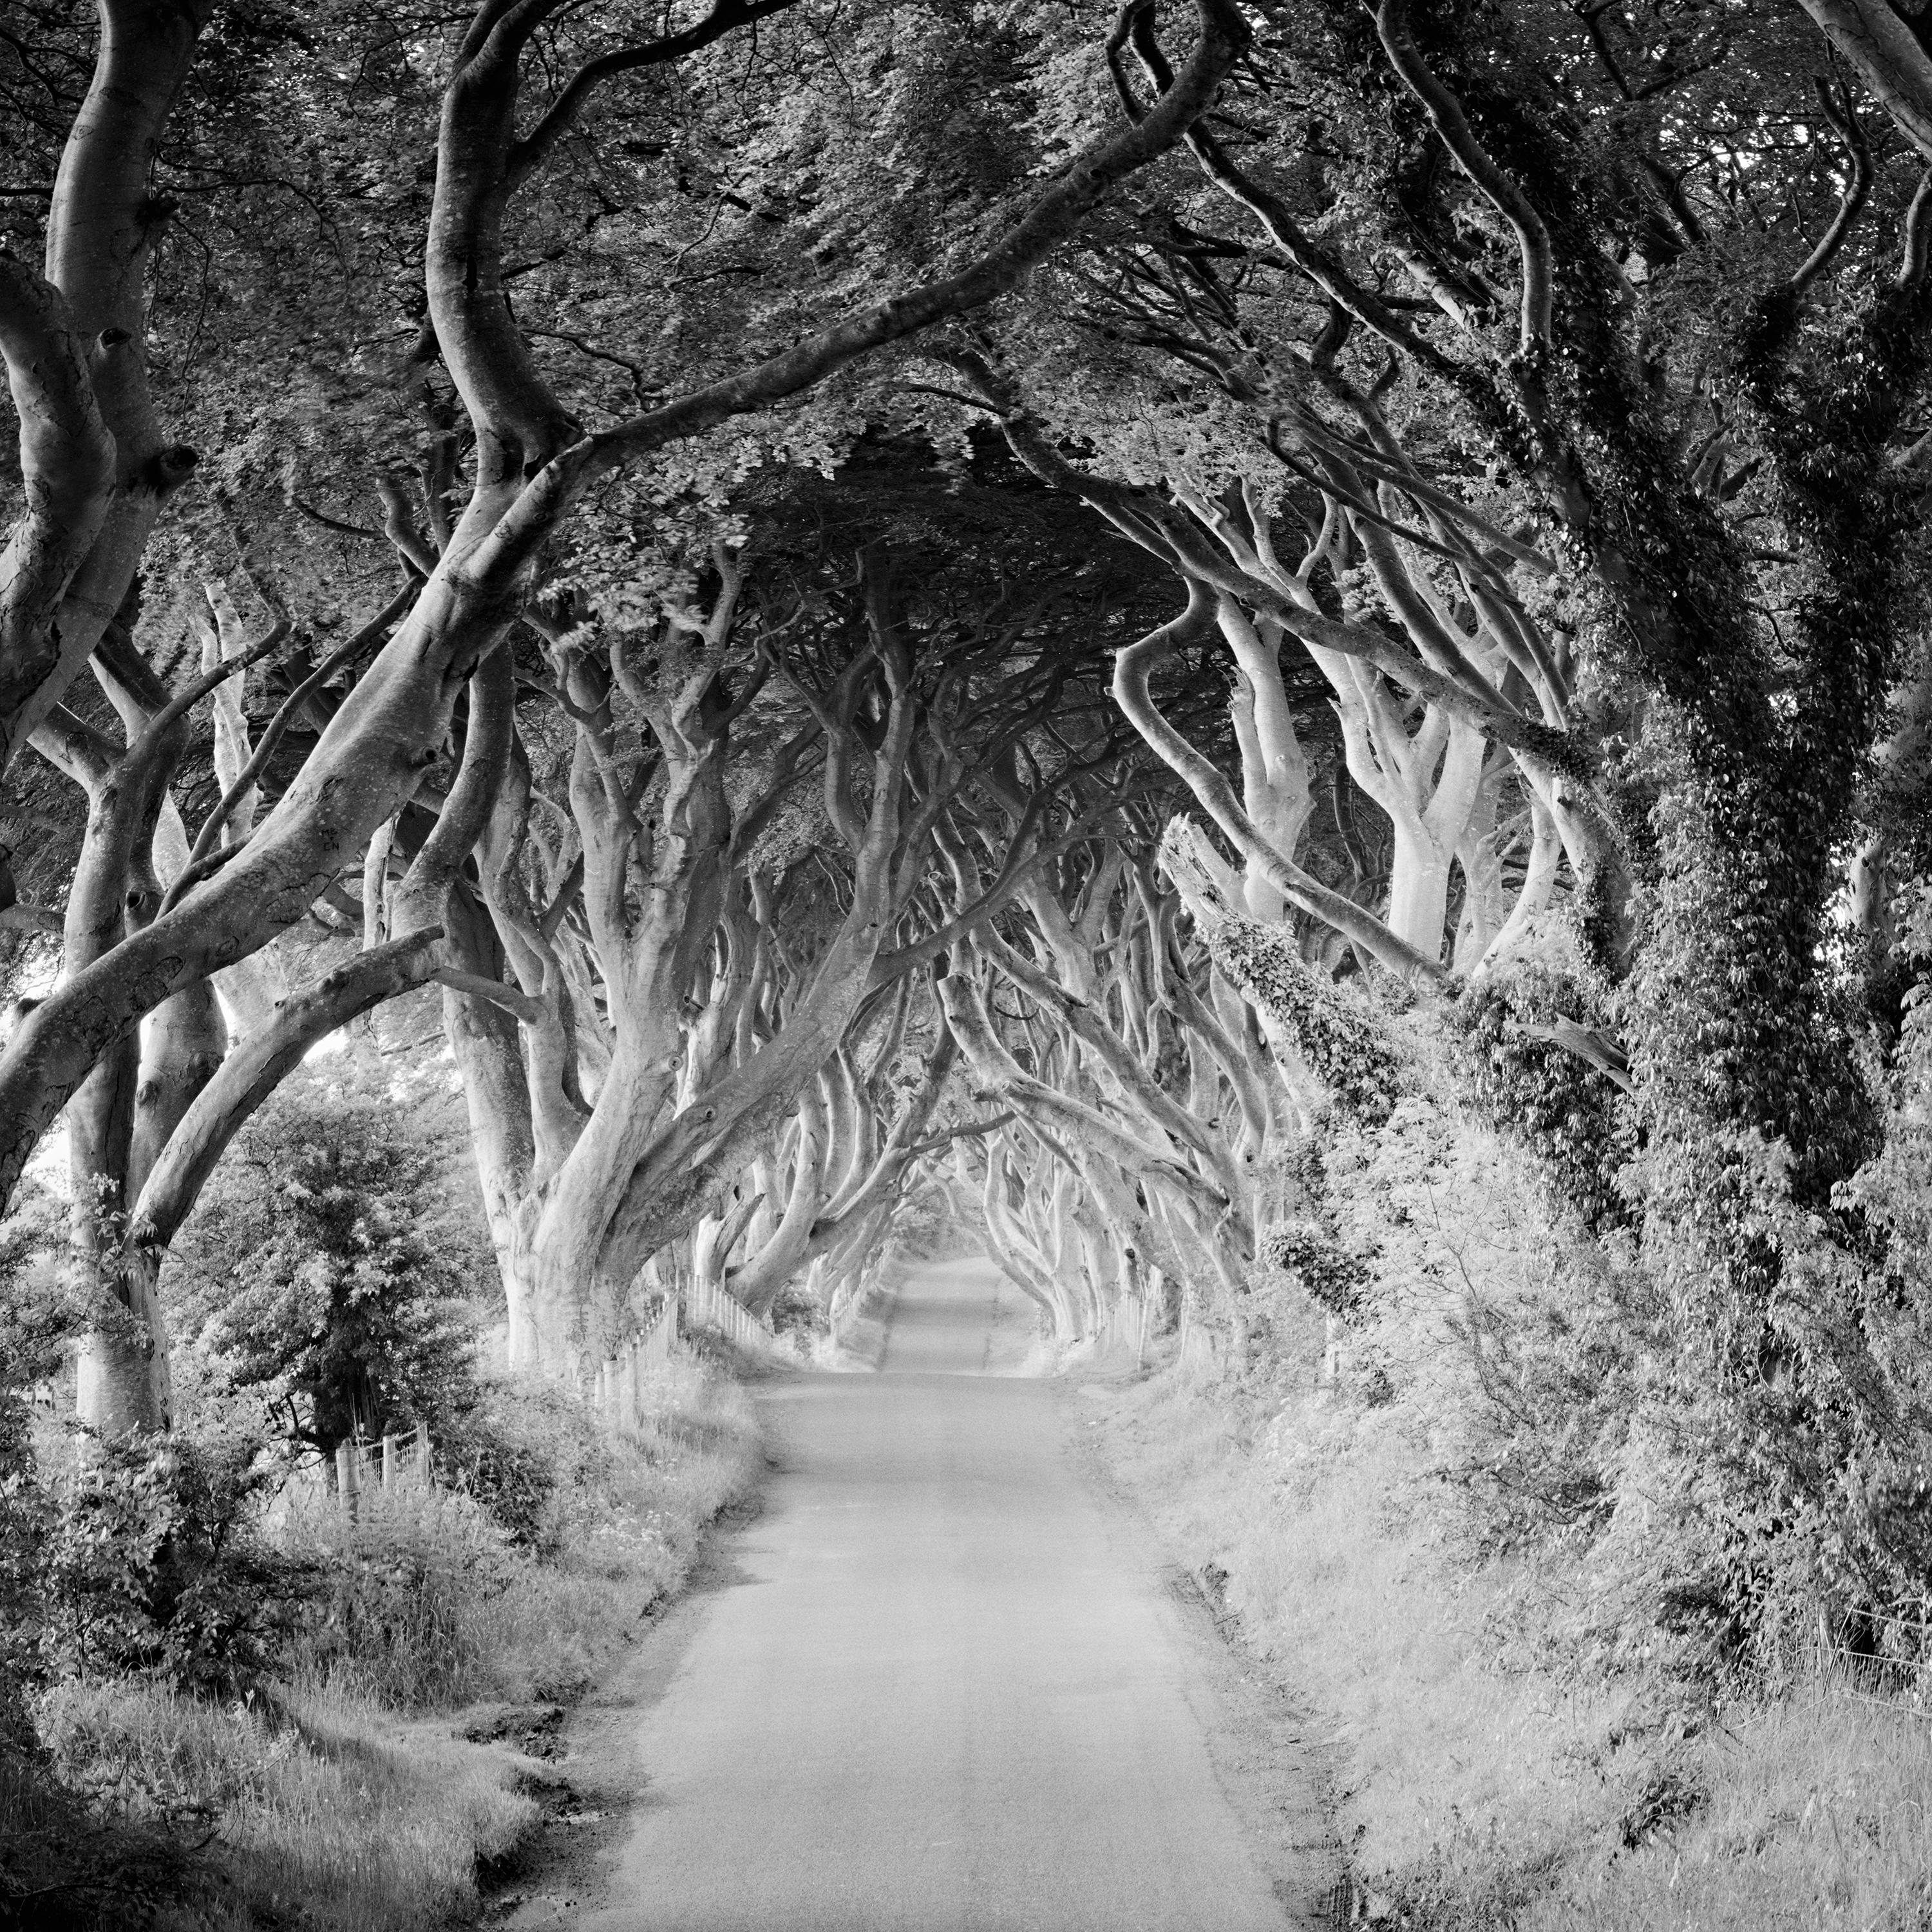 Dark Hedges, beech, trees, Ireland, black and white art landscape photography For Sale 3